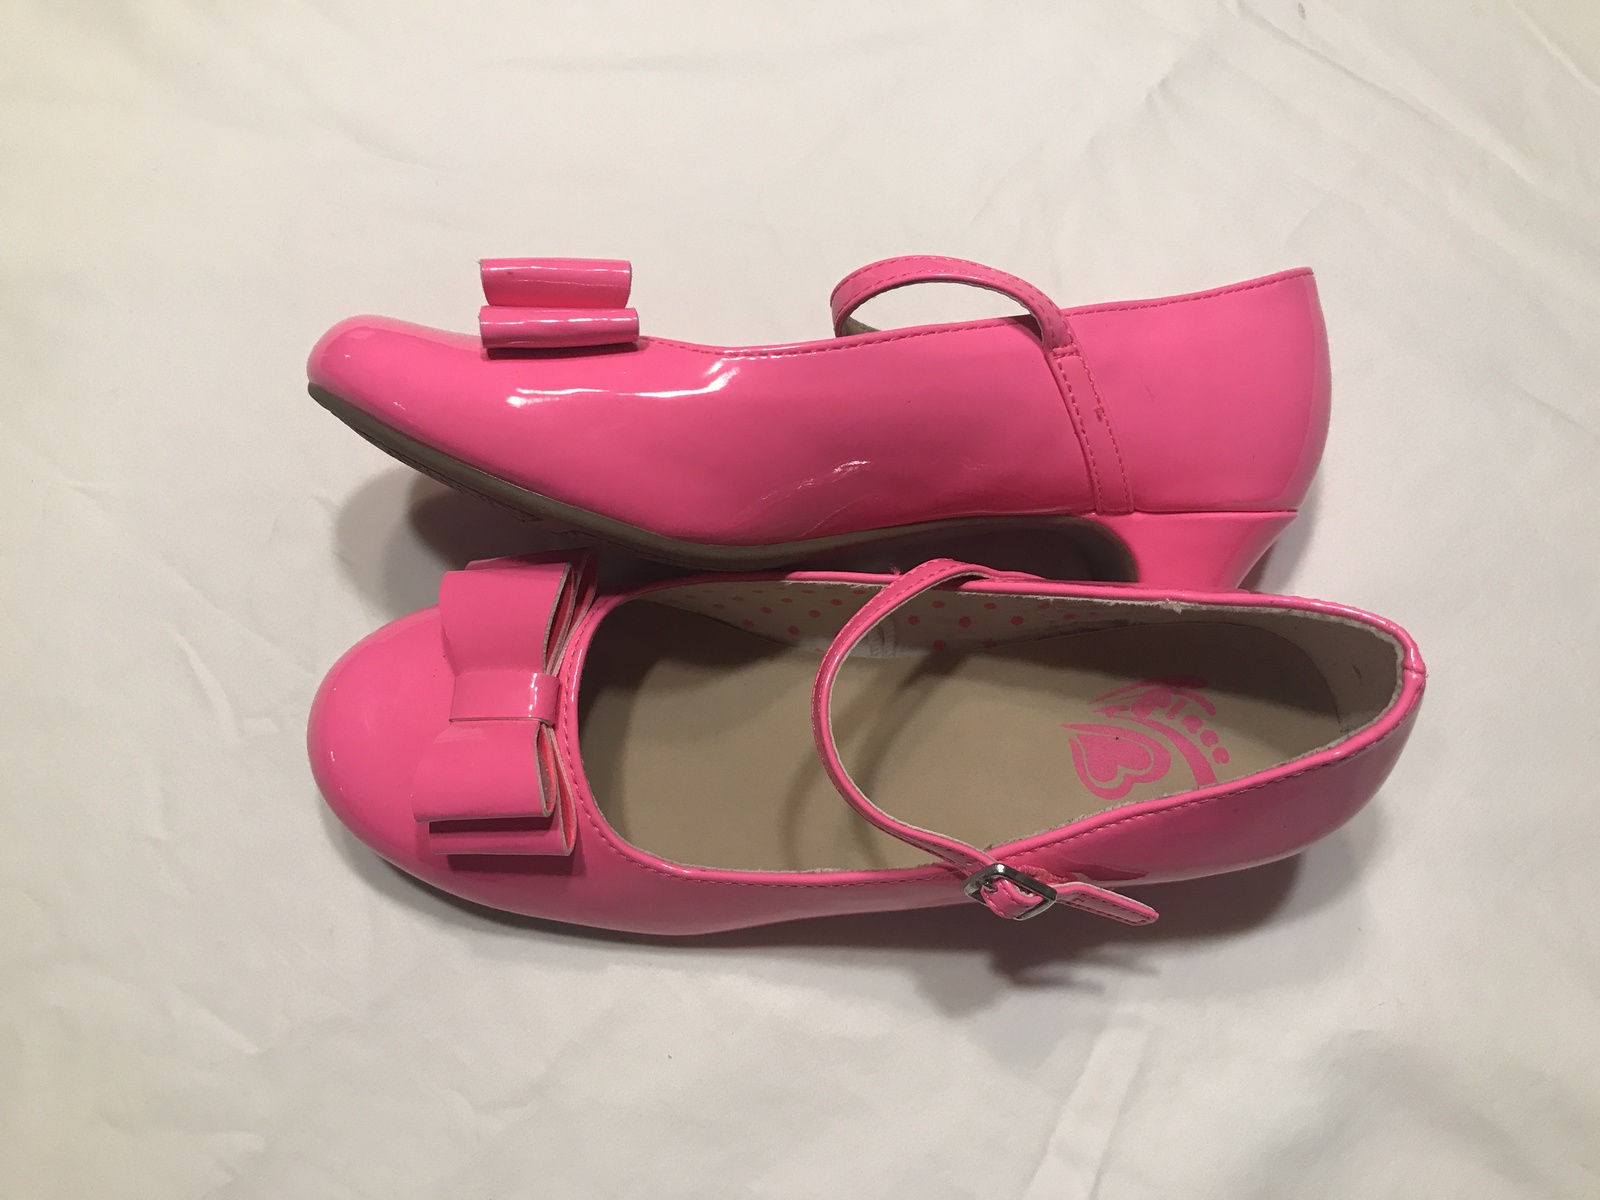 The Children's Place, Hot Pink Shiny, Girl's Dress Shoes, Size 4 ...